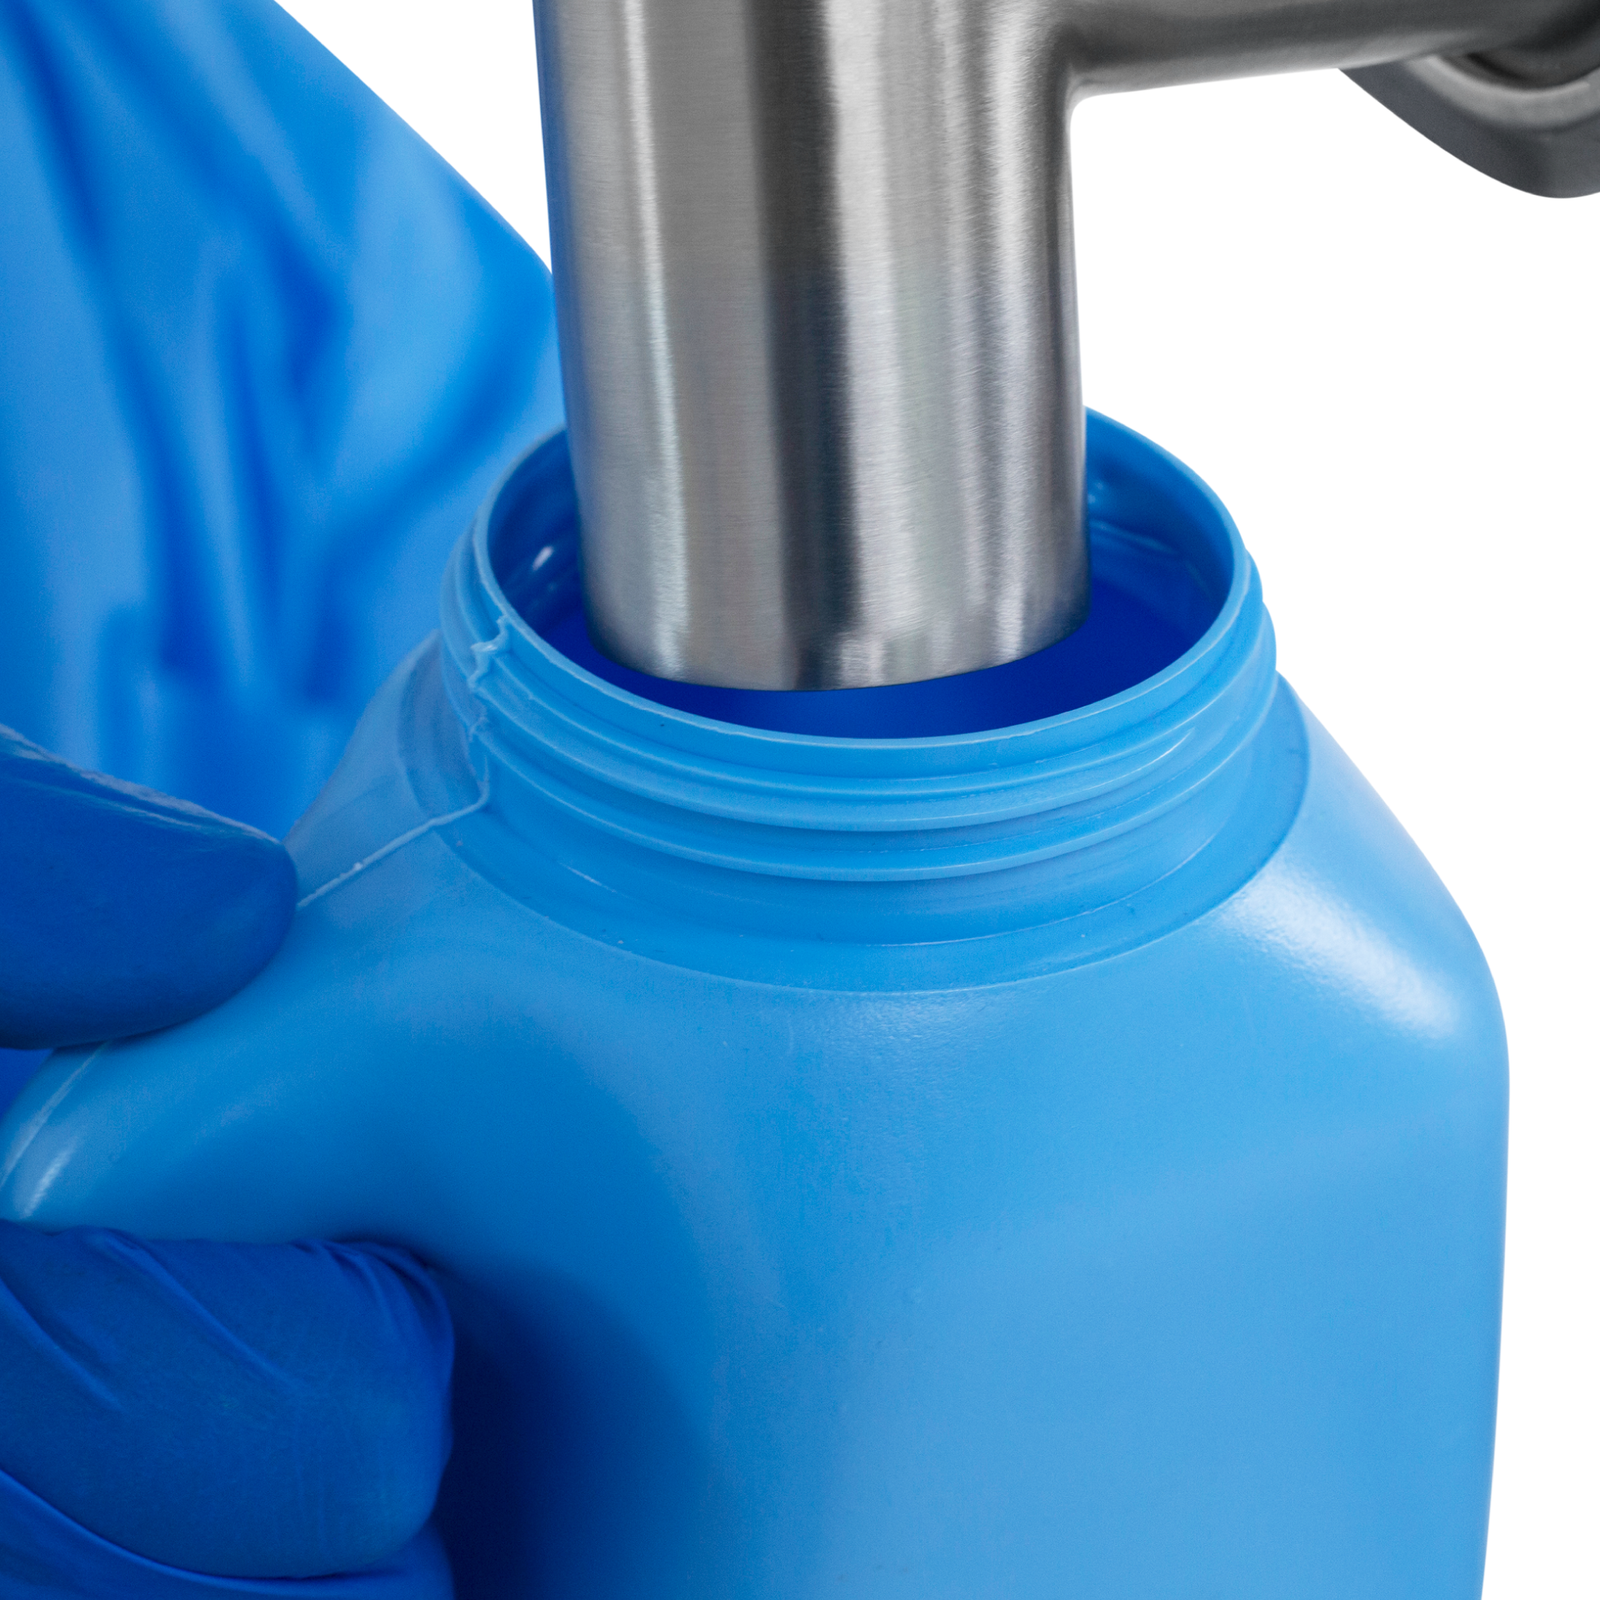 A worker wearing nitrile safety gloves operating the JORES TECHNOLOGIES® Low Viscosity Piston Filler. The person is positioning a 5000ml bottle below the tip of the non-drip nozzle to be filled with accuracy by the liquid filling machine.